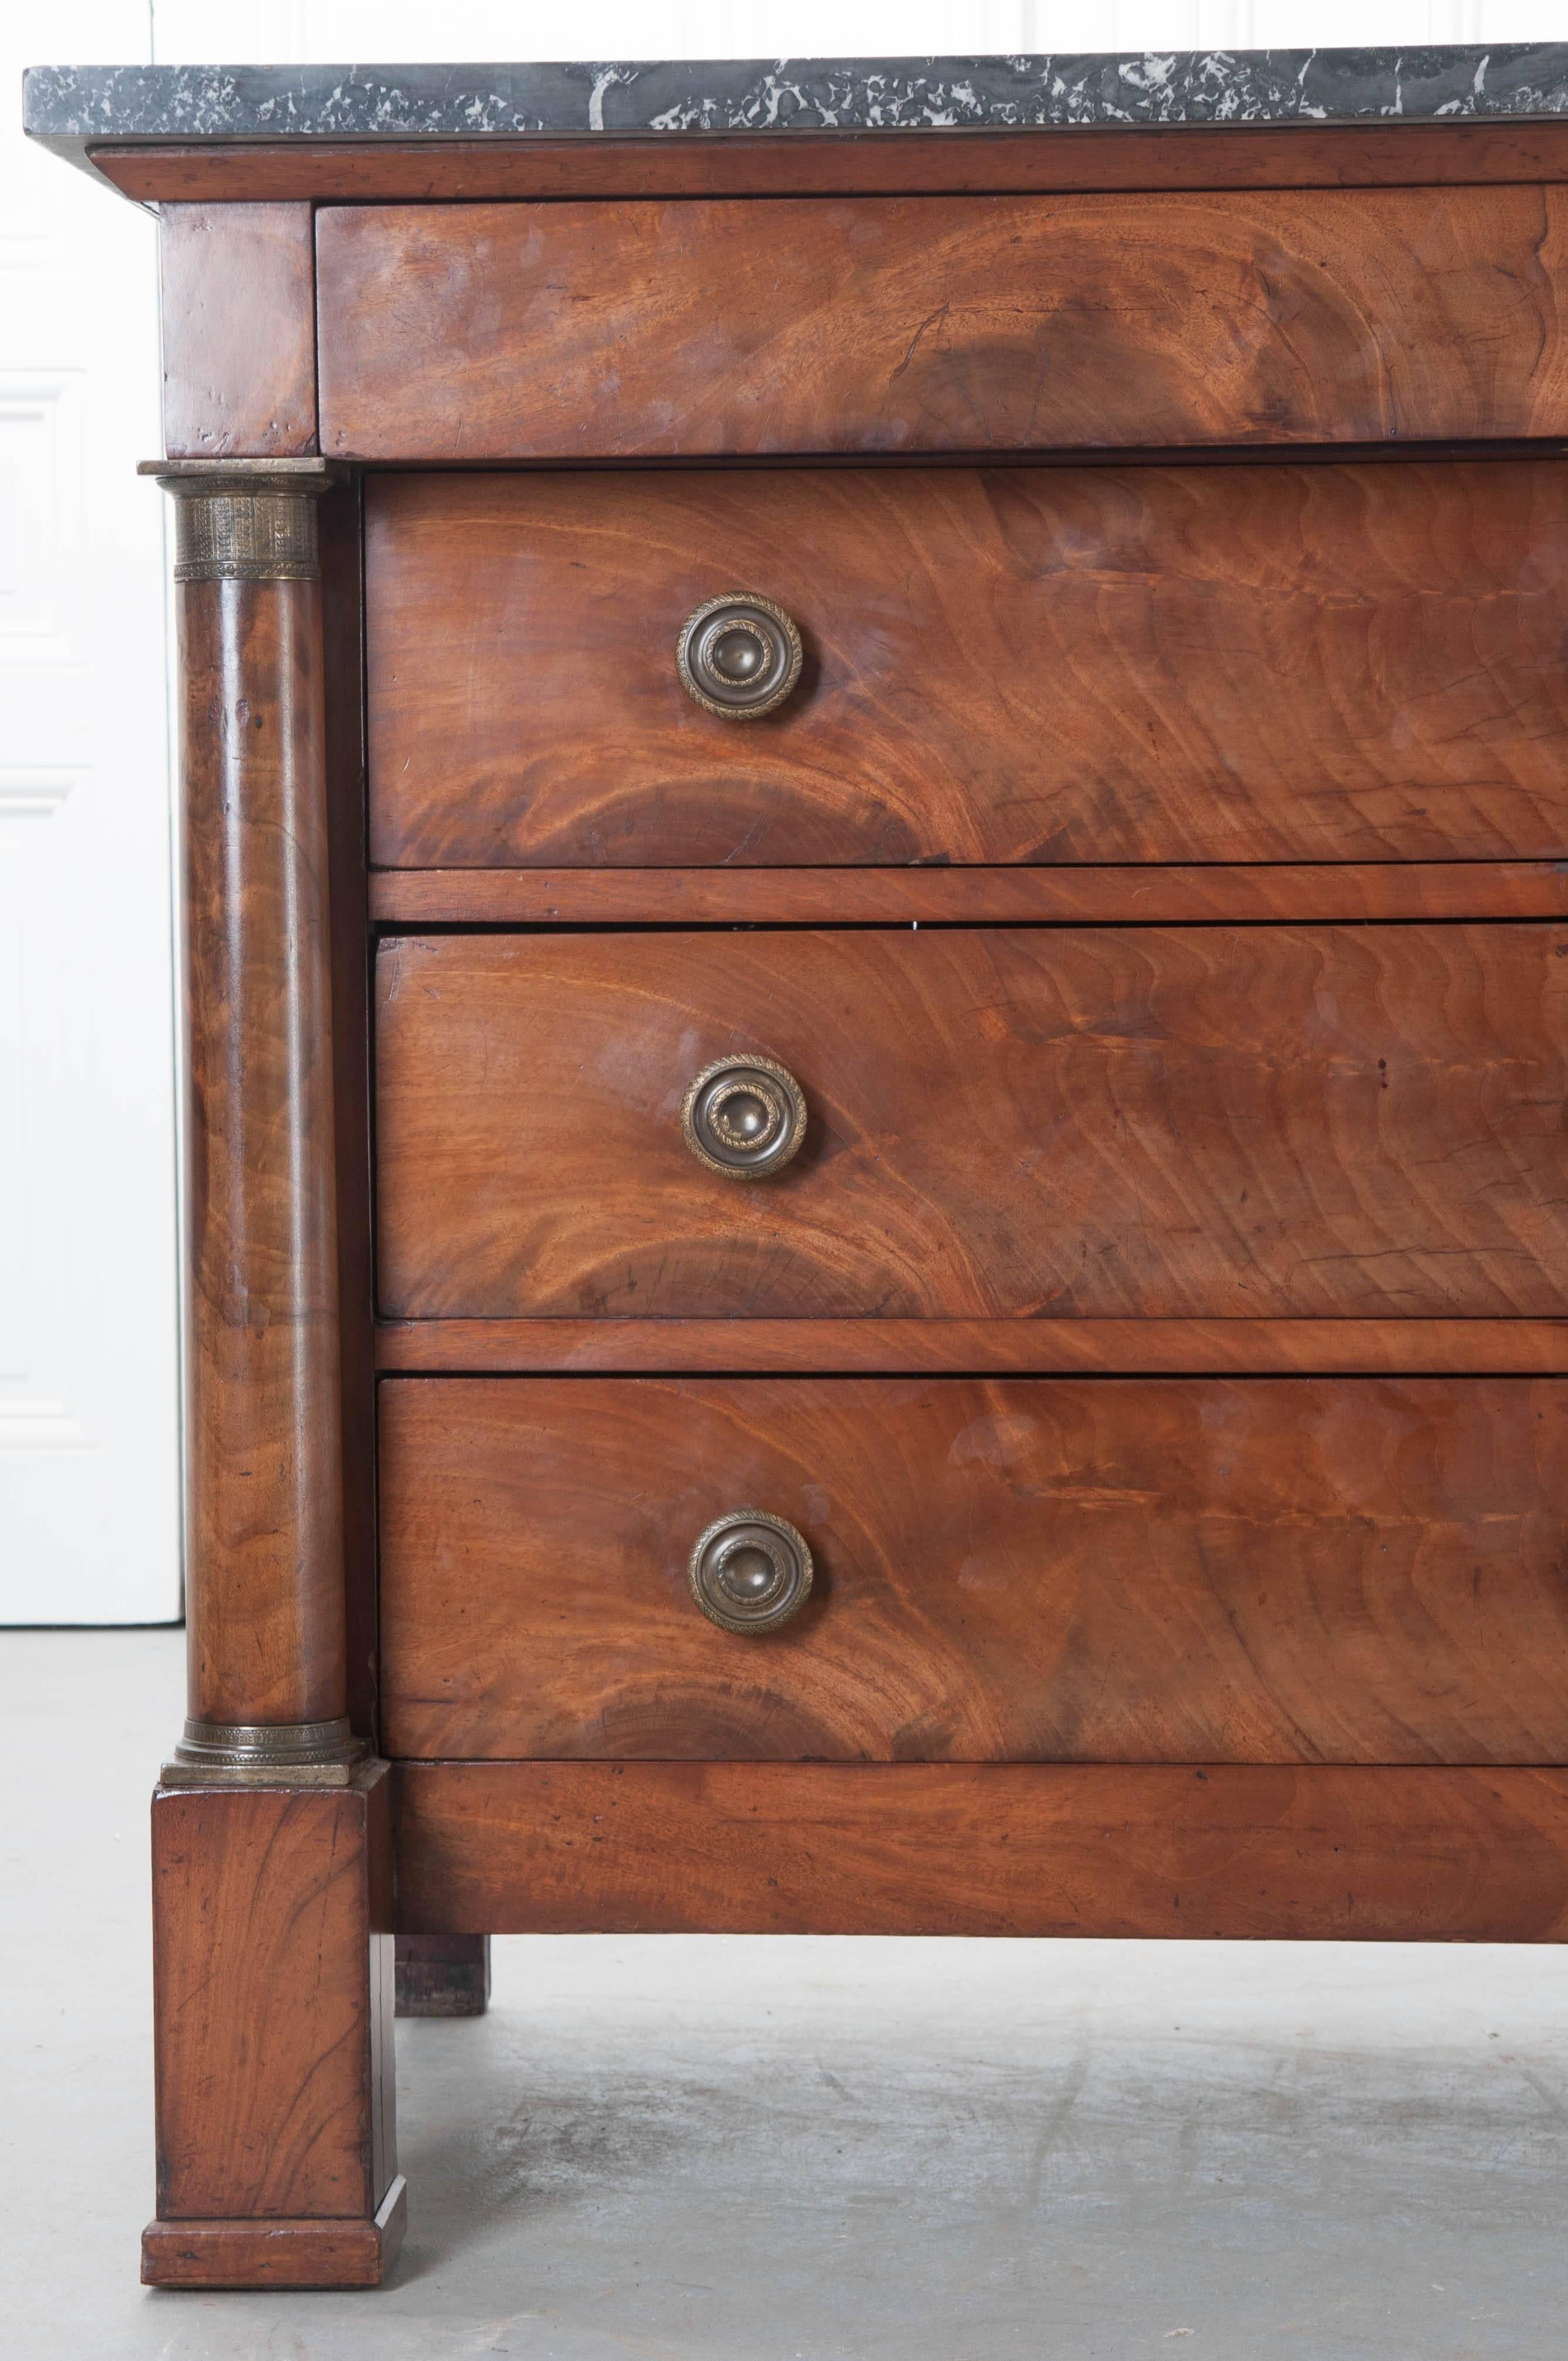 Extraordinary bookmatched walnut veneer graces this gorgeous Empire period commode from France. The piece has a slate colored marble top, with white veins, that is in excellent antique condition. The commode is complete with four drawers, the